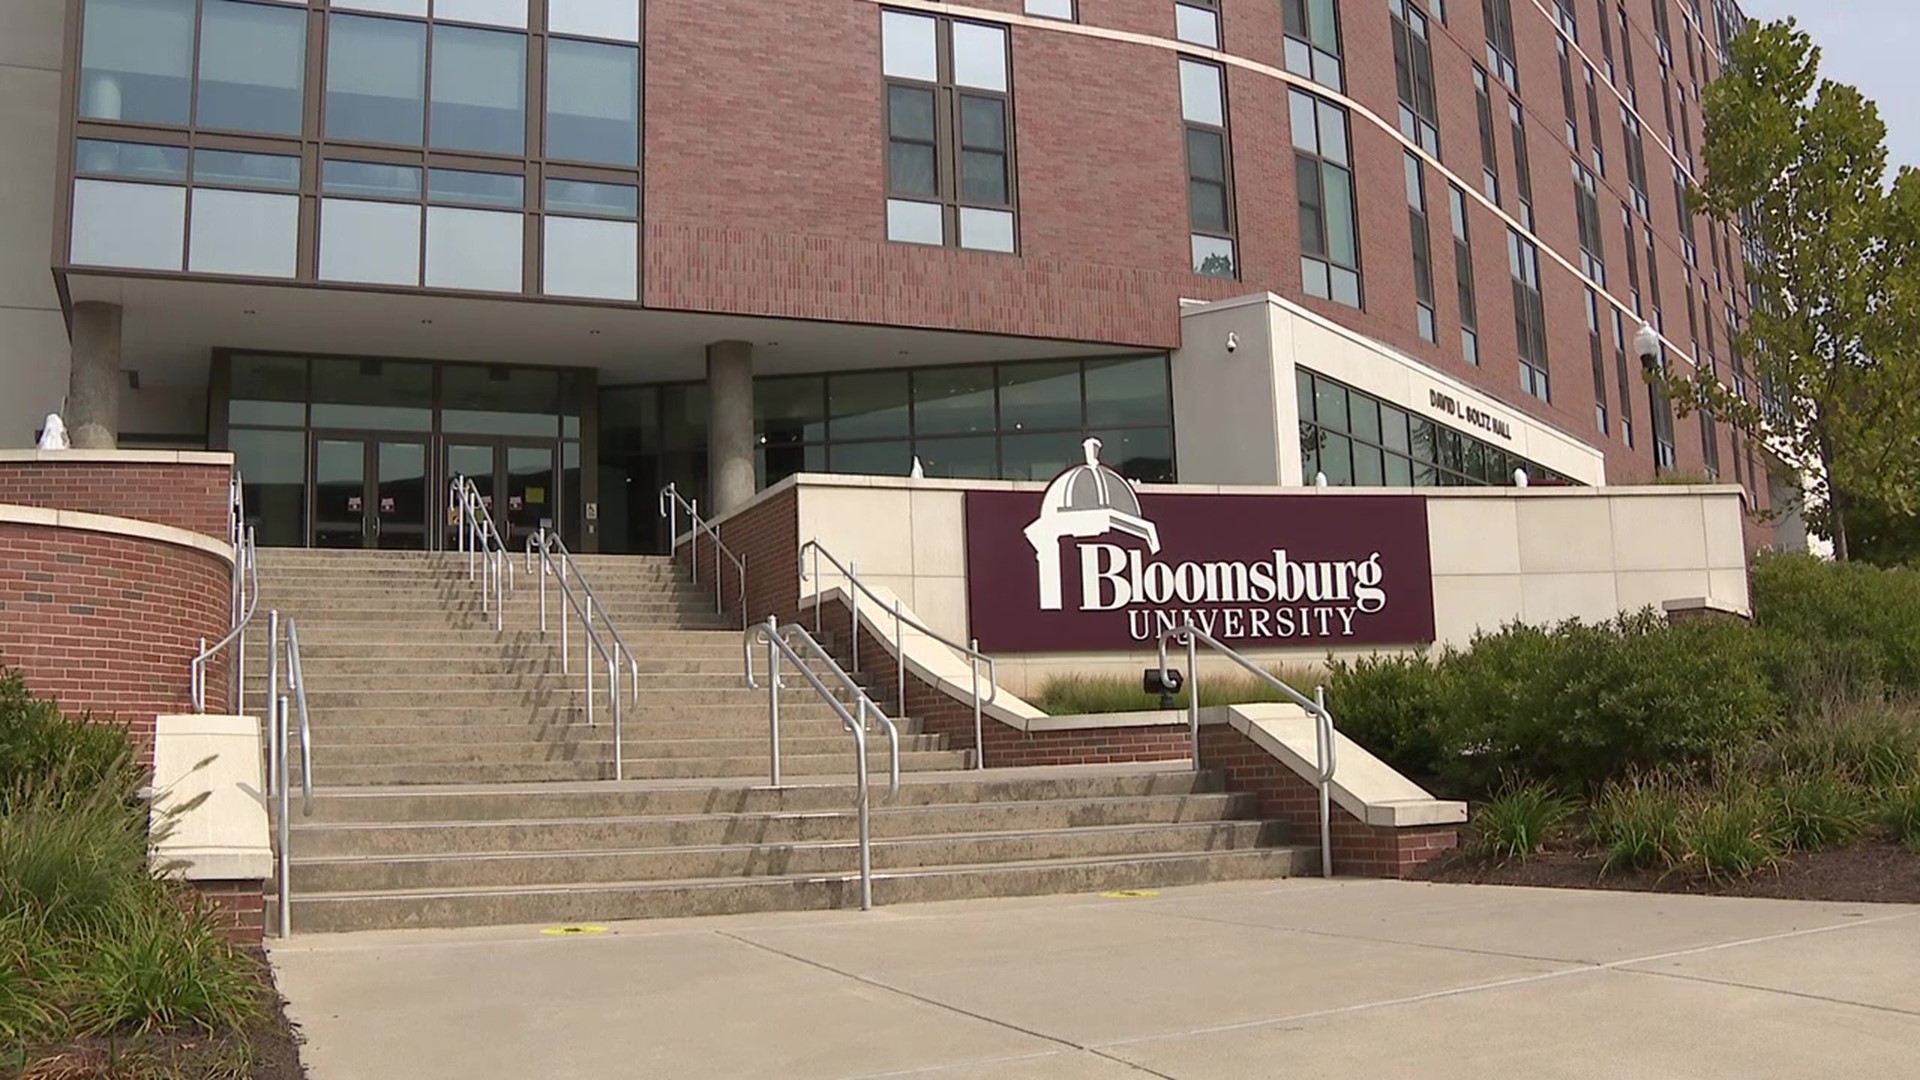 Columbia County is seeing a downward trend in COVID-19 cases right now and officials at Bloomsburg University believe virtual classes are some of the reasons why.